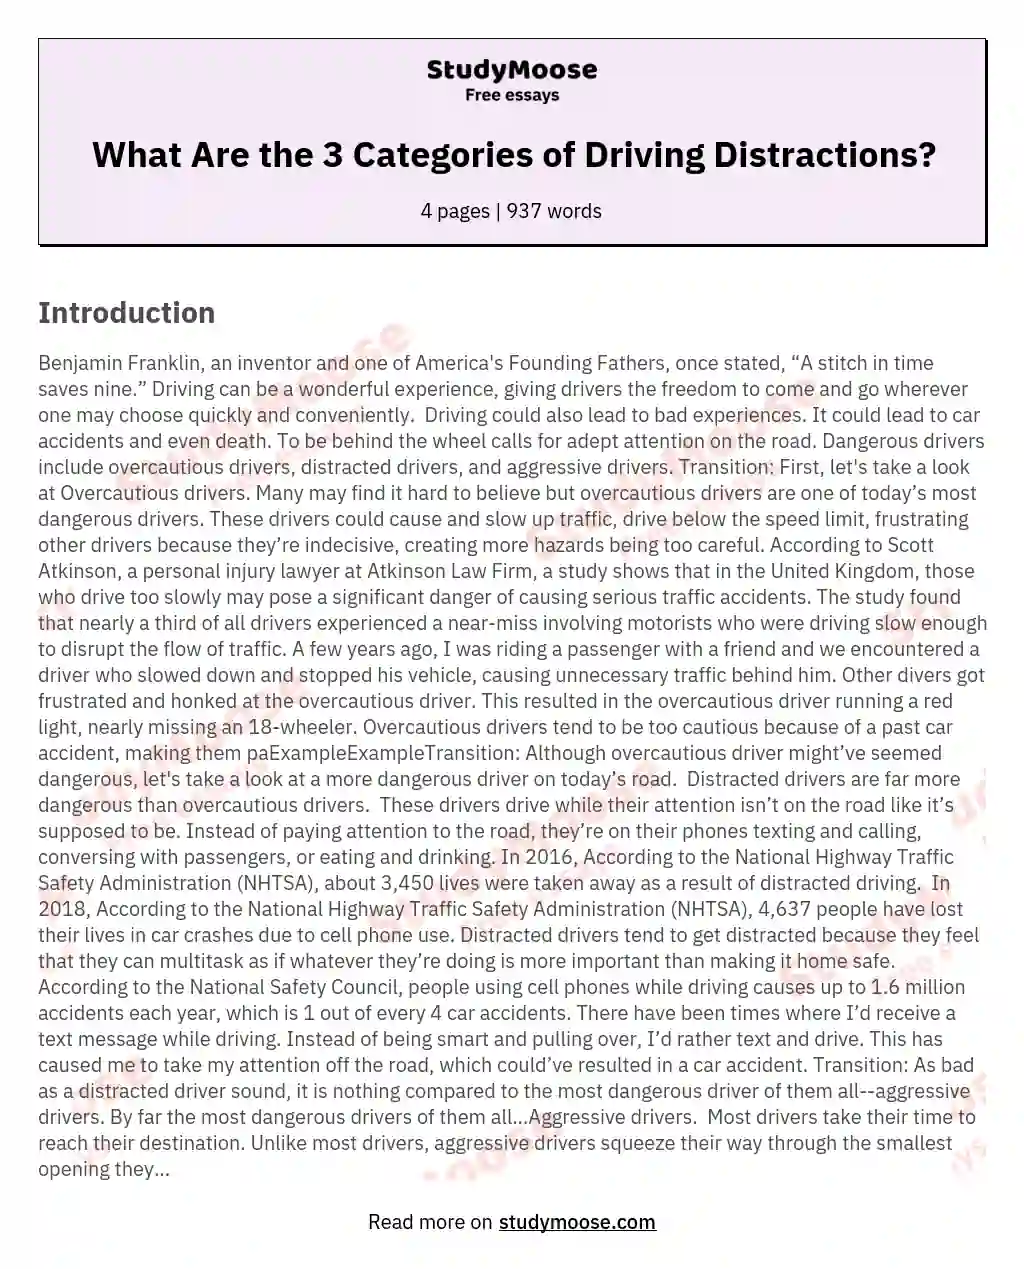 What Are the 3 Categories of Driving Distractions?